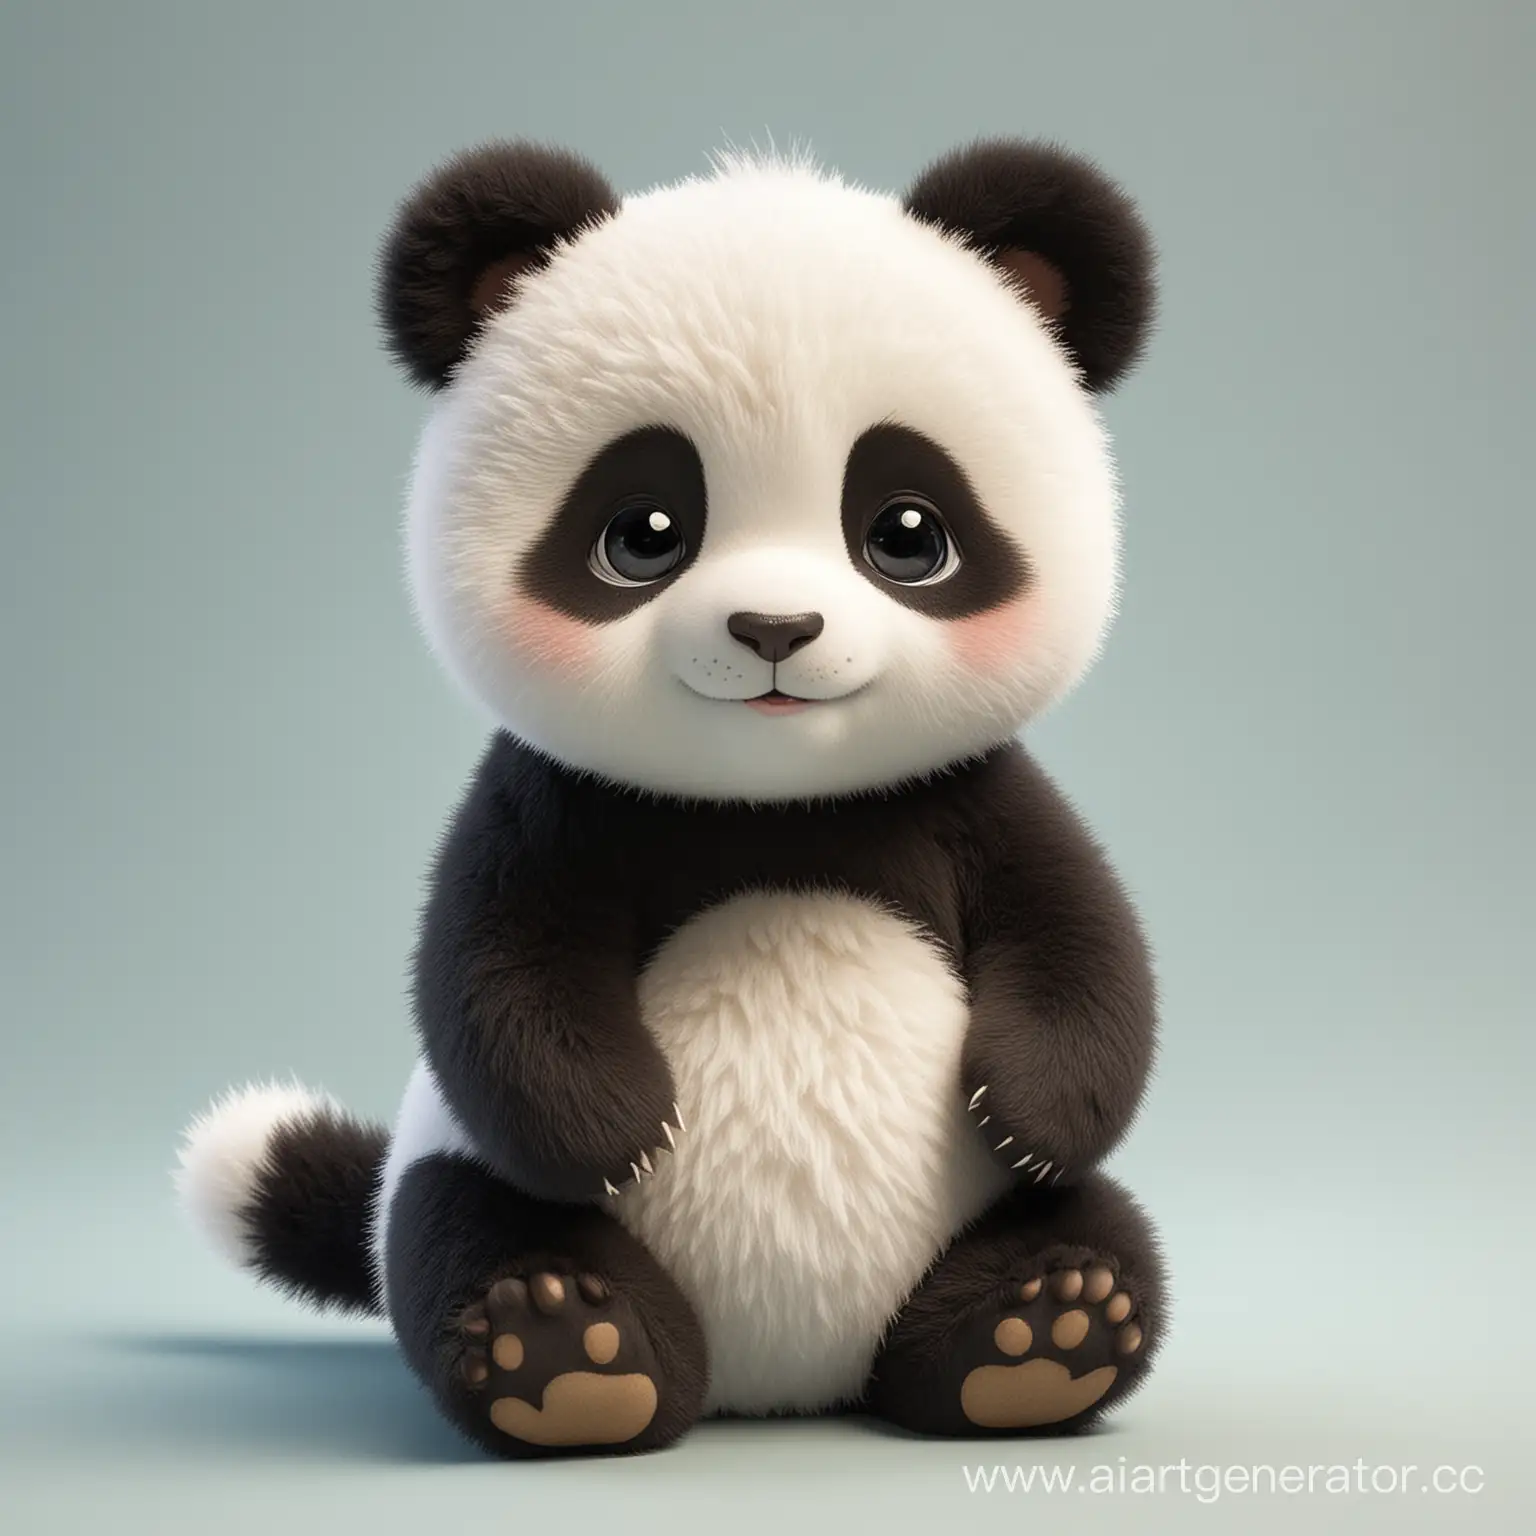 Adorable-Fluffy-Panda-with-Big-Eyes-and-Tail-for-Childrens-Delight